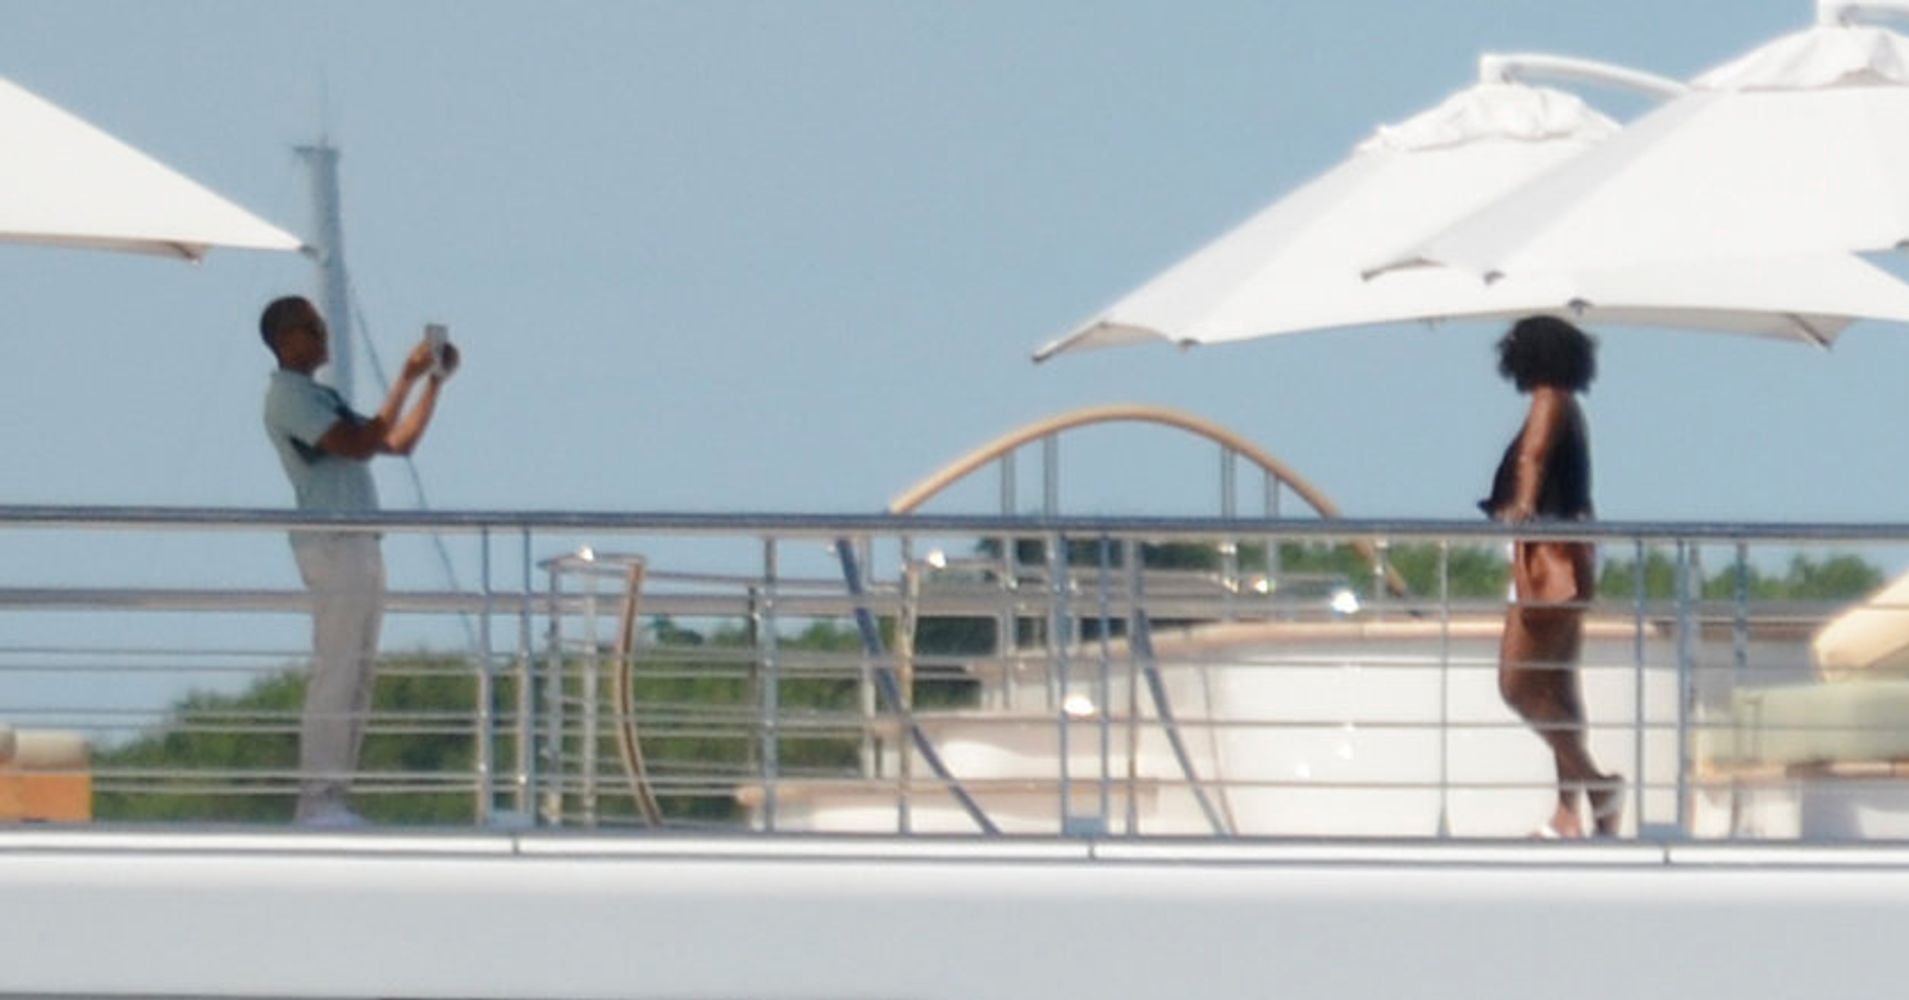 Barack Obama Took A Vacation Photo Of Michelle And The Internet Loves It | HuffPost1907 x 1000